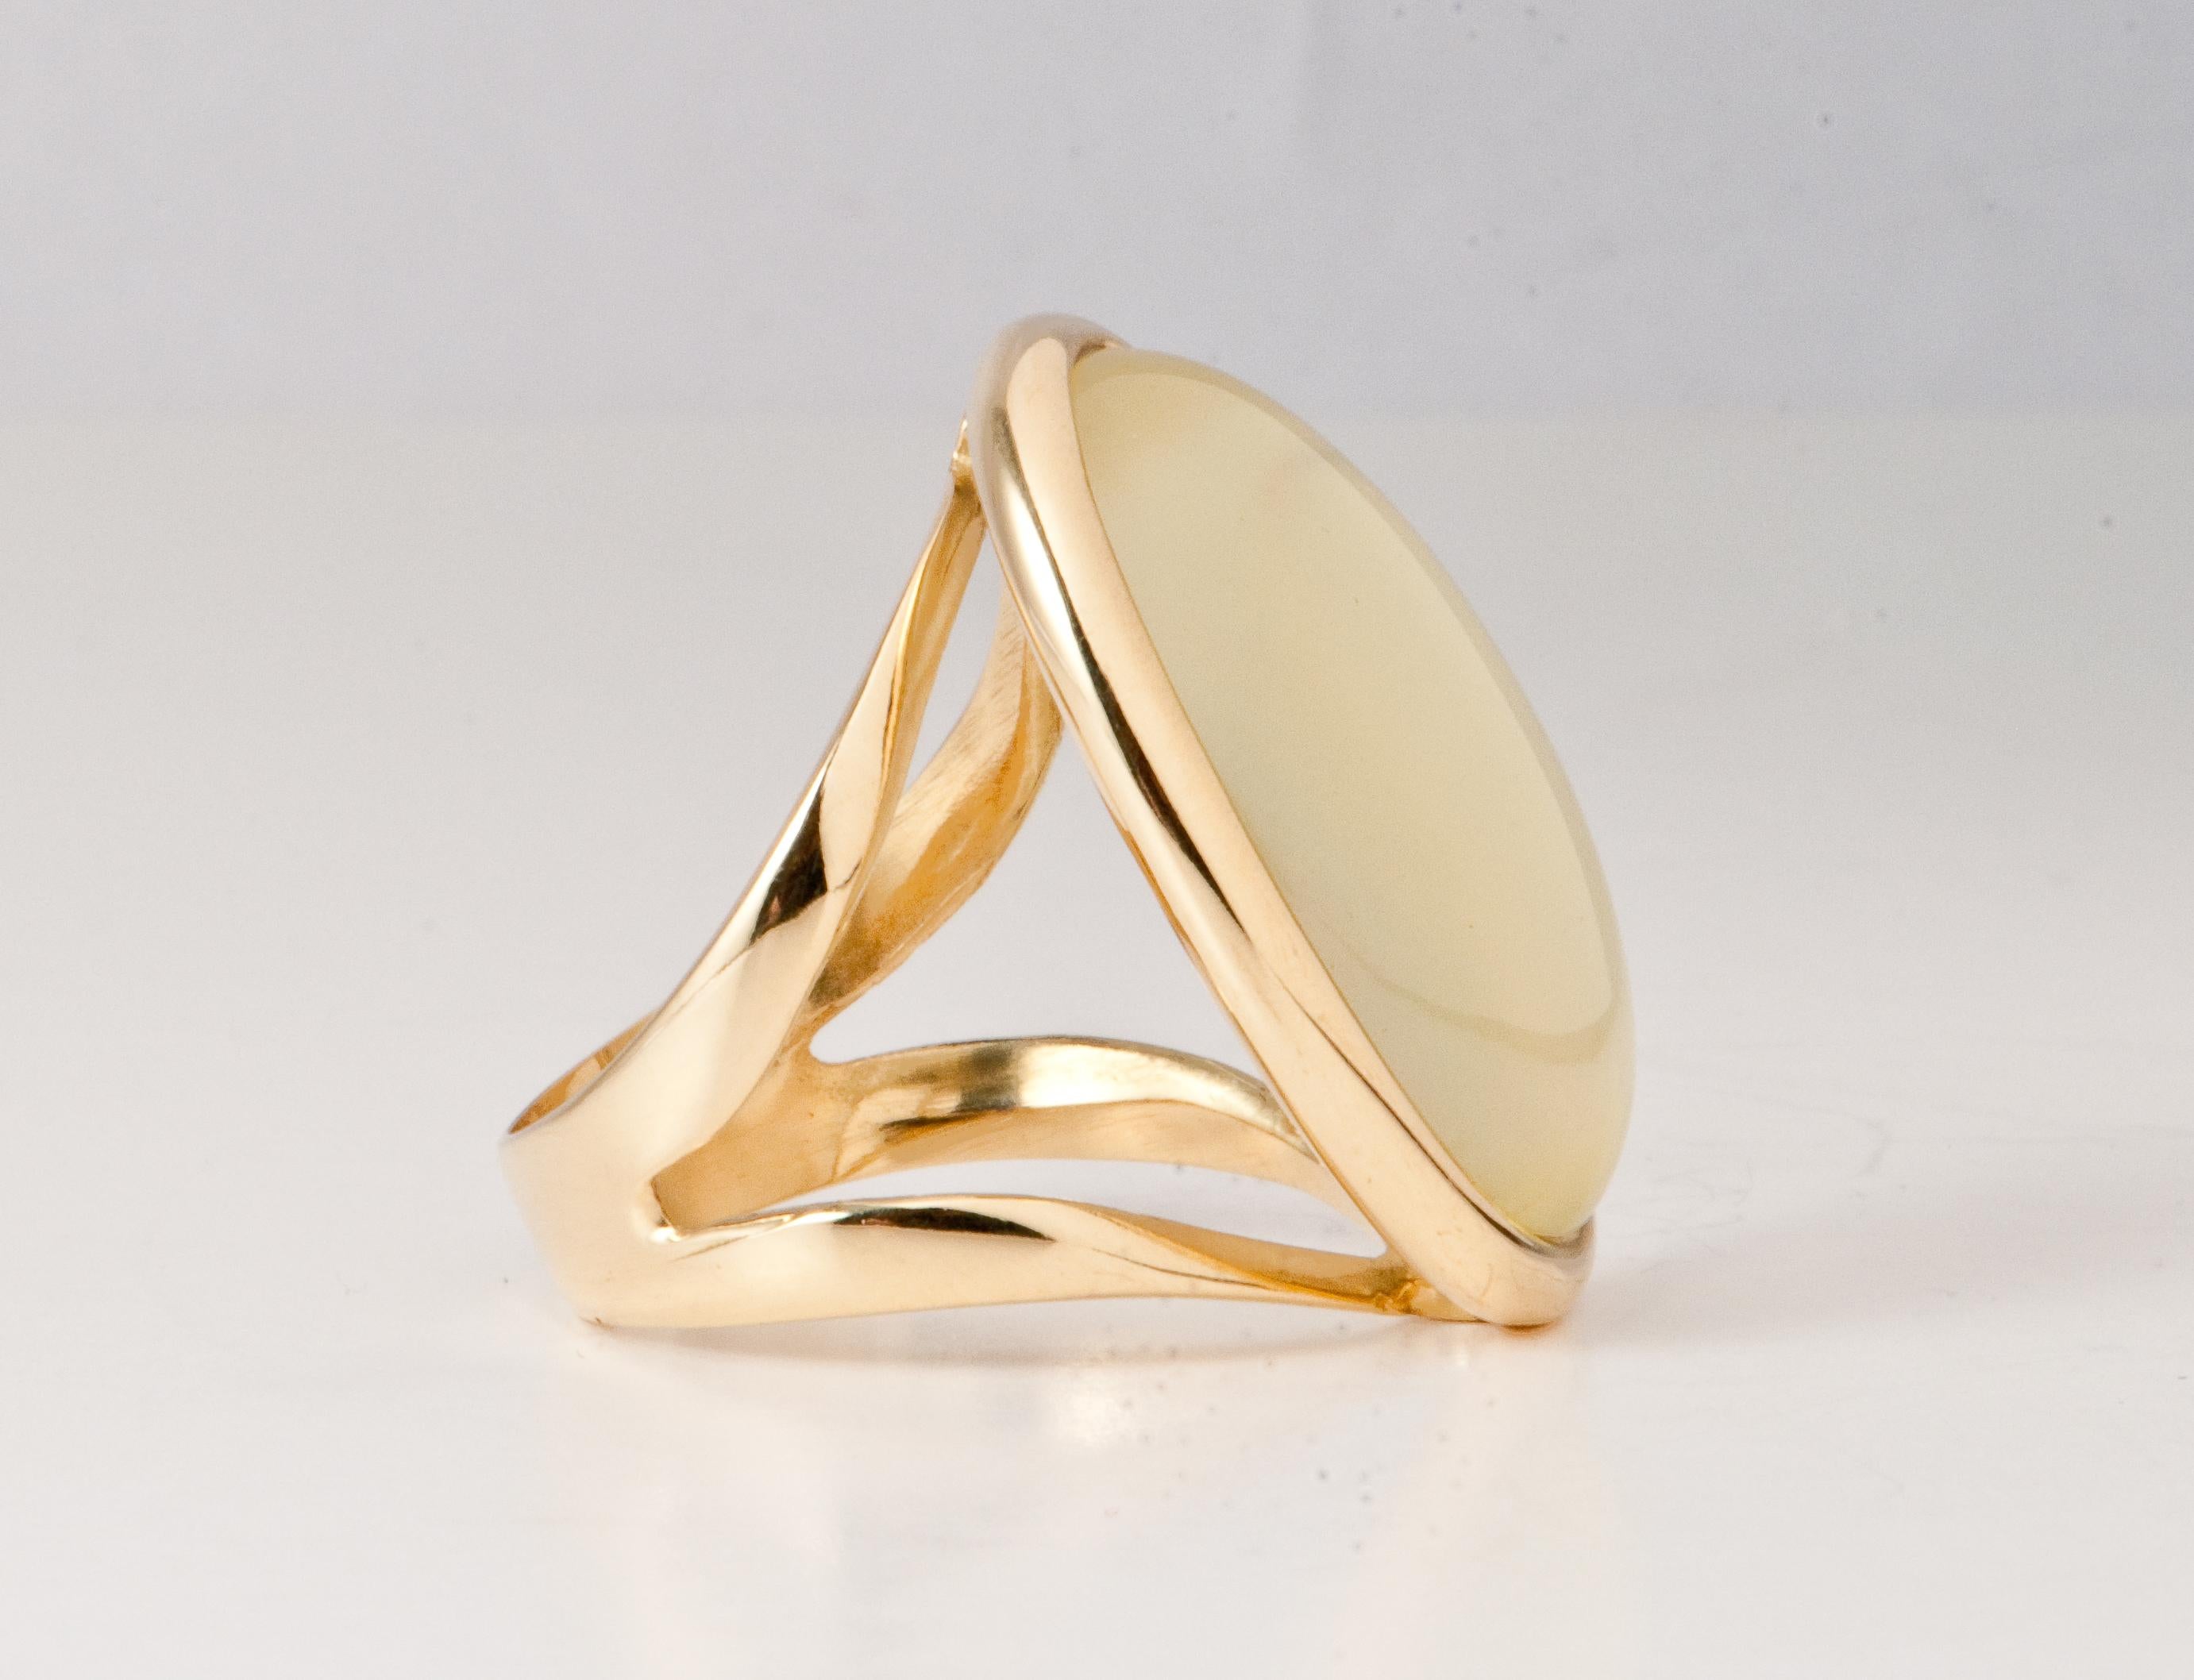 Yellow Gold Ring surmounted by a lemon quartz Shape Cabochon .
A nacre plate adjusted under the stone gives it a profound and bright reflection.
There are 5.60 grams of 18k yellow gold.
US Size : 8